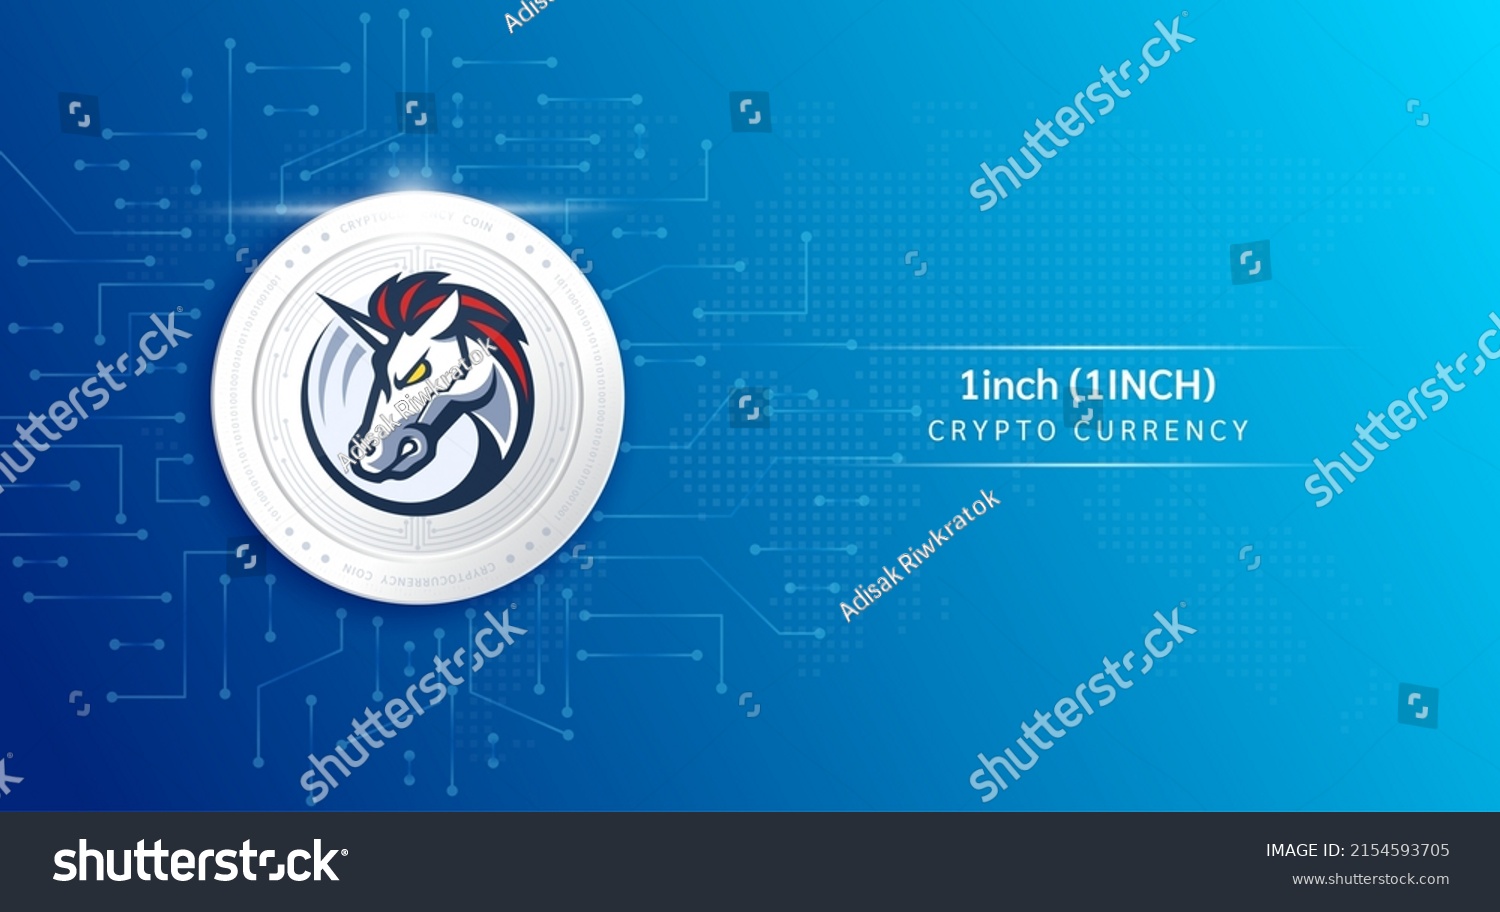 SVG of 1inch coin cryptocurrency token symbol. Crypto currency with stock market investment trading. Coin icon on dark background. Economic trends finance concept. 3D Vector illustration. svg